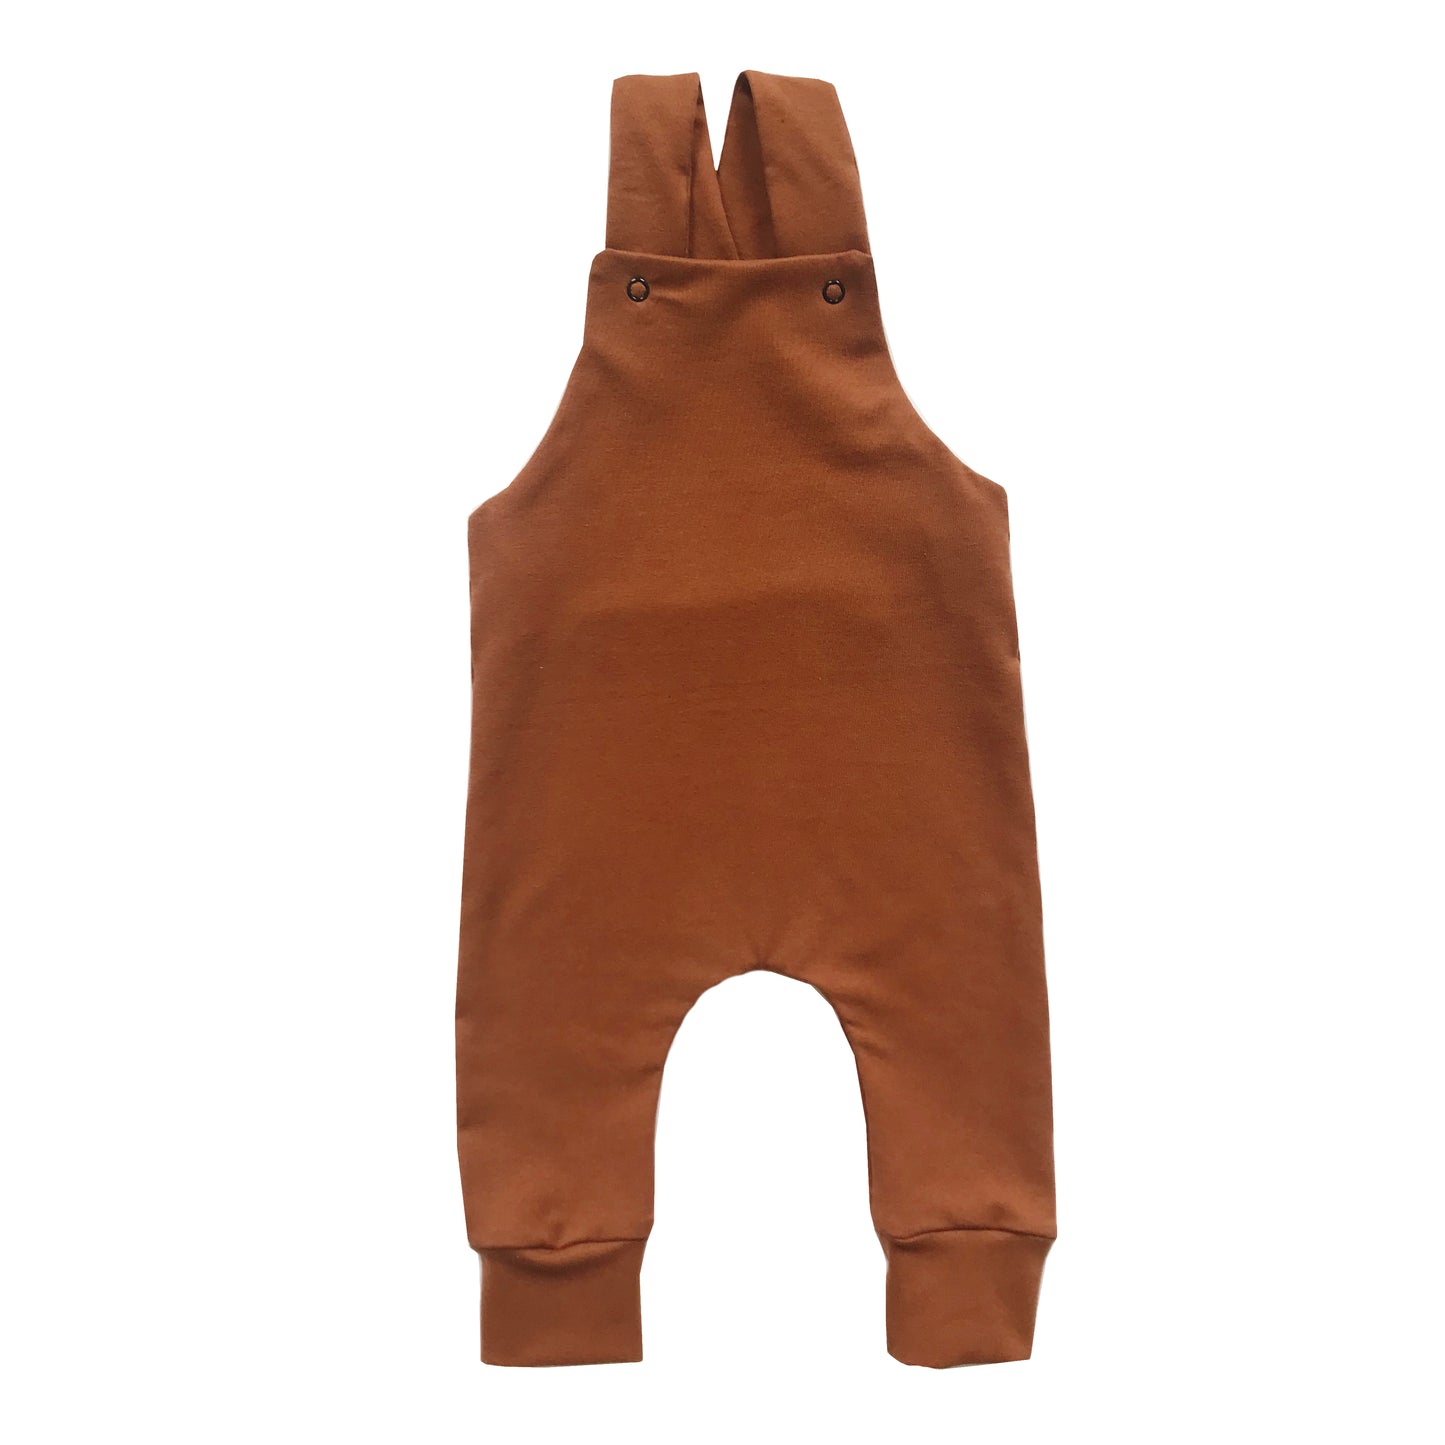 Rust dungarees